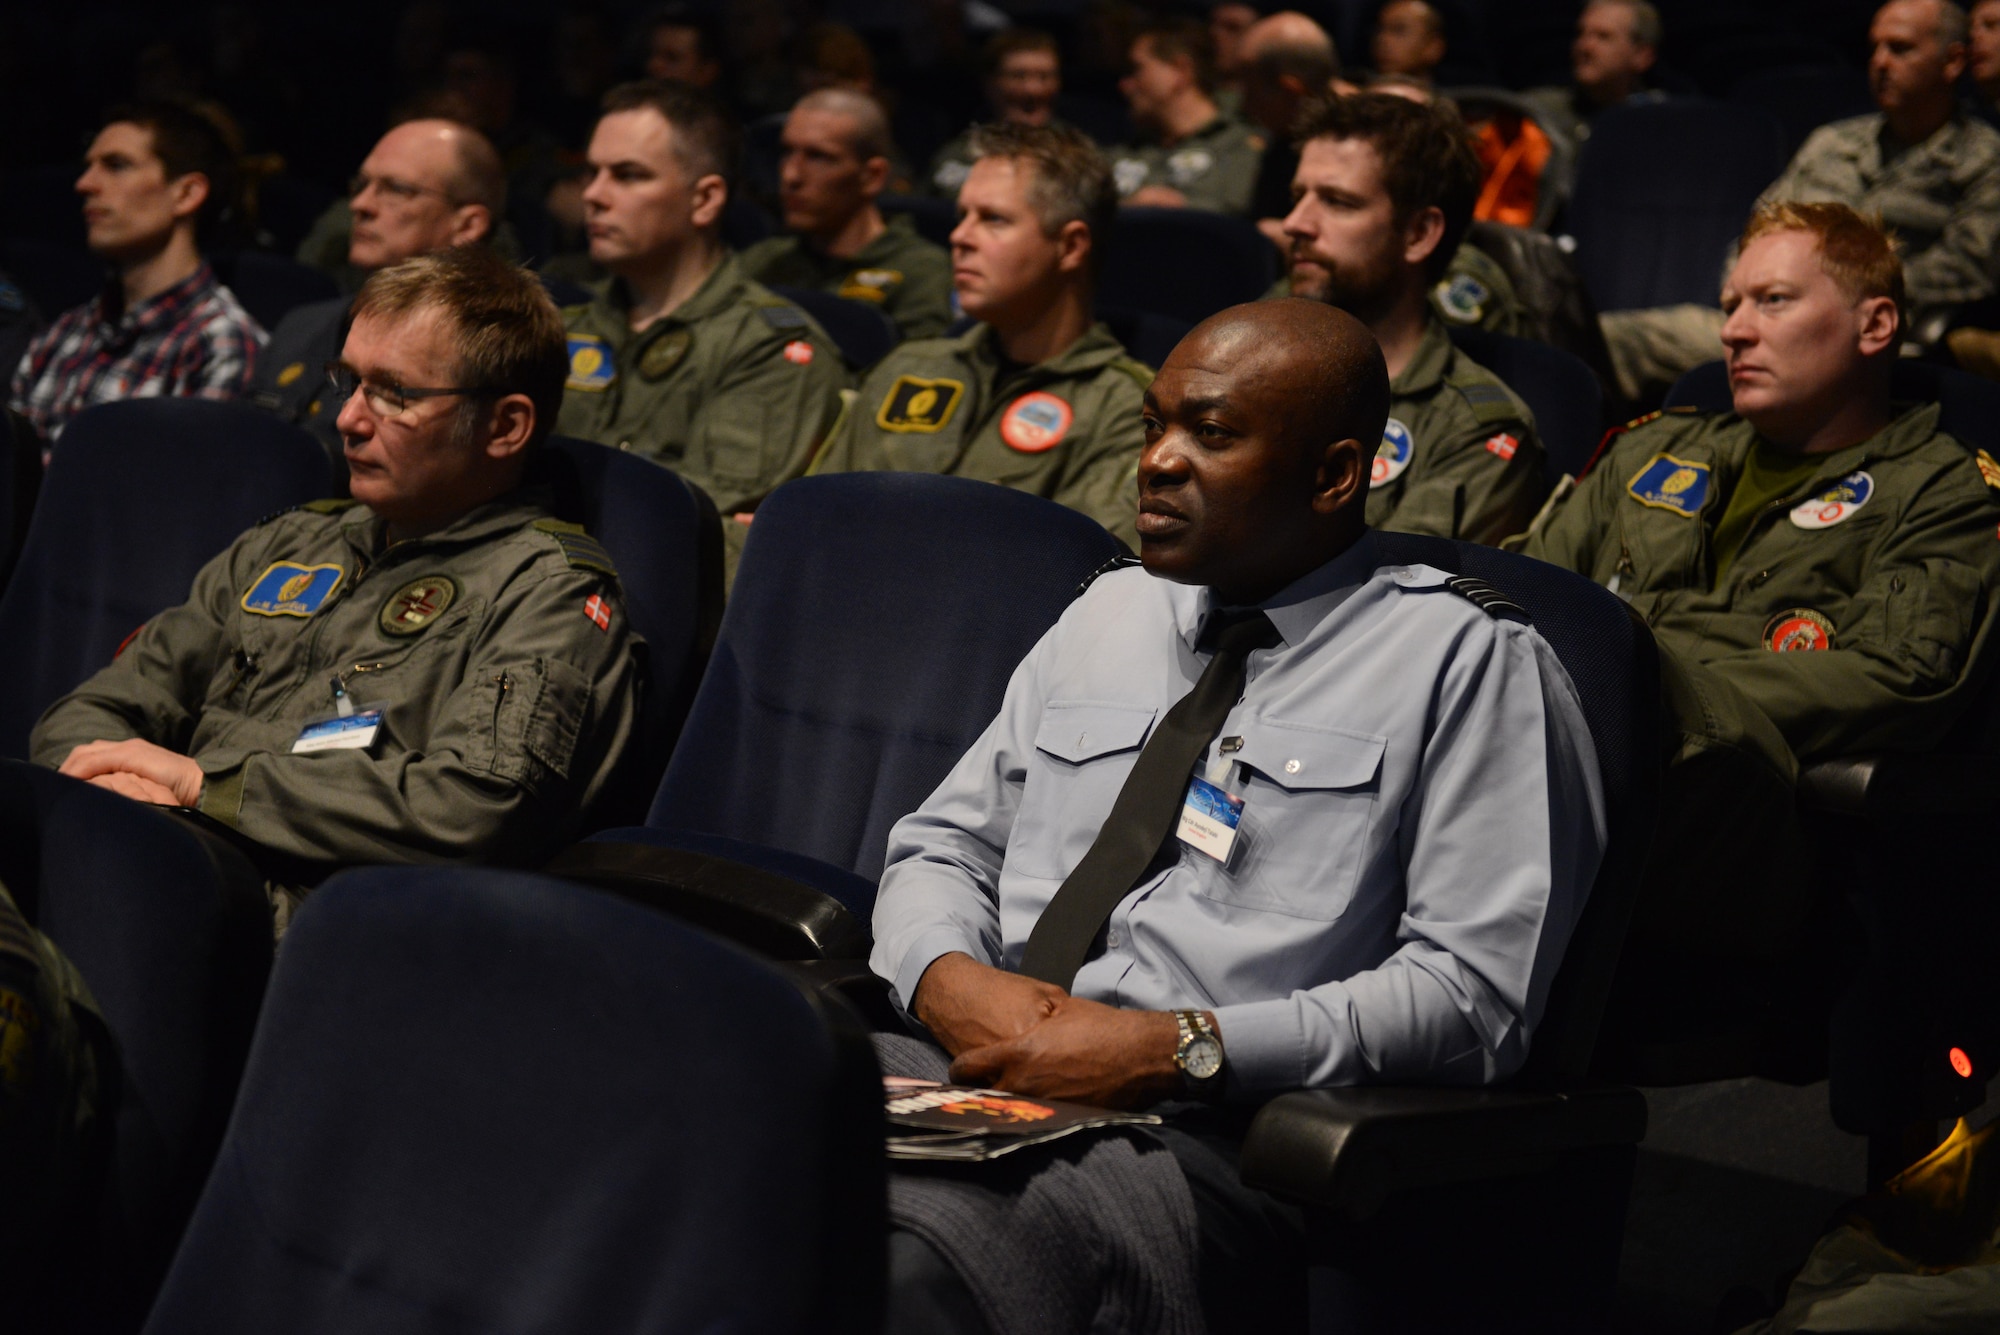 RAMSTEIN AIR BASE, Germany – Wing Commander Ayodeji Talabi, a consultant in occupational medicine with the Royal Air Force, listens to a presentation during the 29th Annual Aerospace Medicine Summit and NATO Science and Technology Organization Technical Course at the Hercules Theater here March 10, 2014. Talabi said he’s been trying to attend the summit for the past four years and is thrilled to finally have the opportunity to take part in the event. He joined more than 170 medical professionals from 16 nations at the summit. (U.S. Air Force Photo by Tech. Sgt. James M. Hodgman)